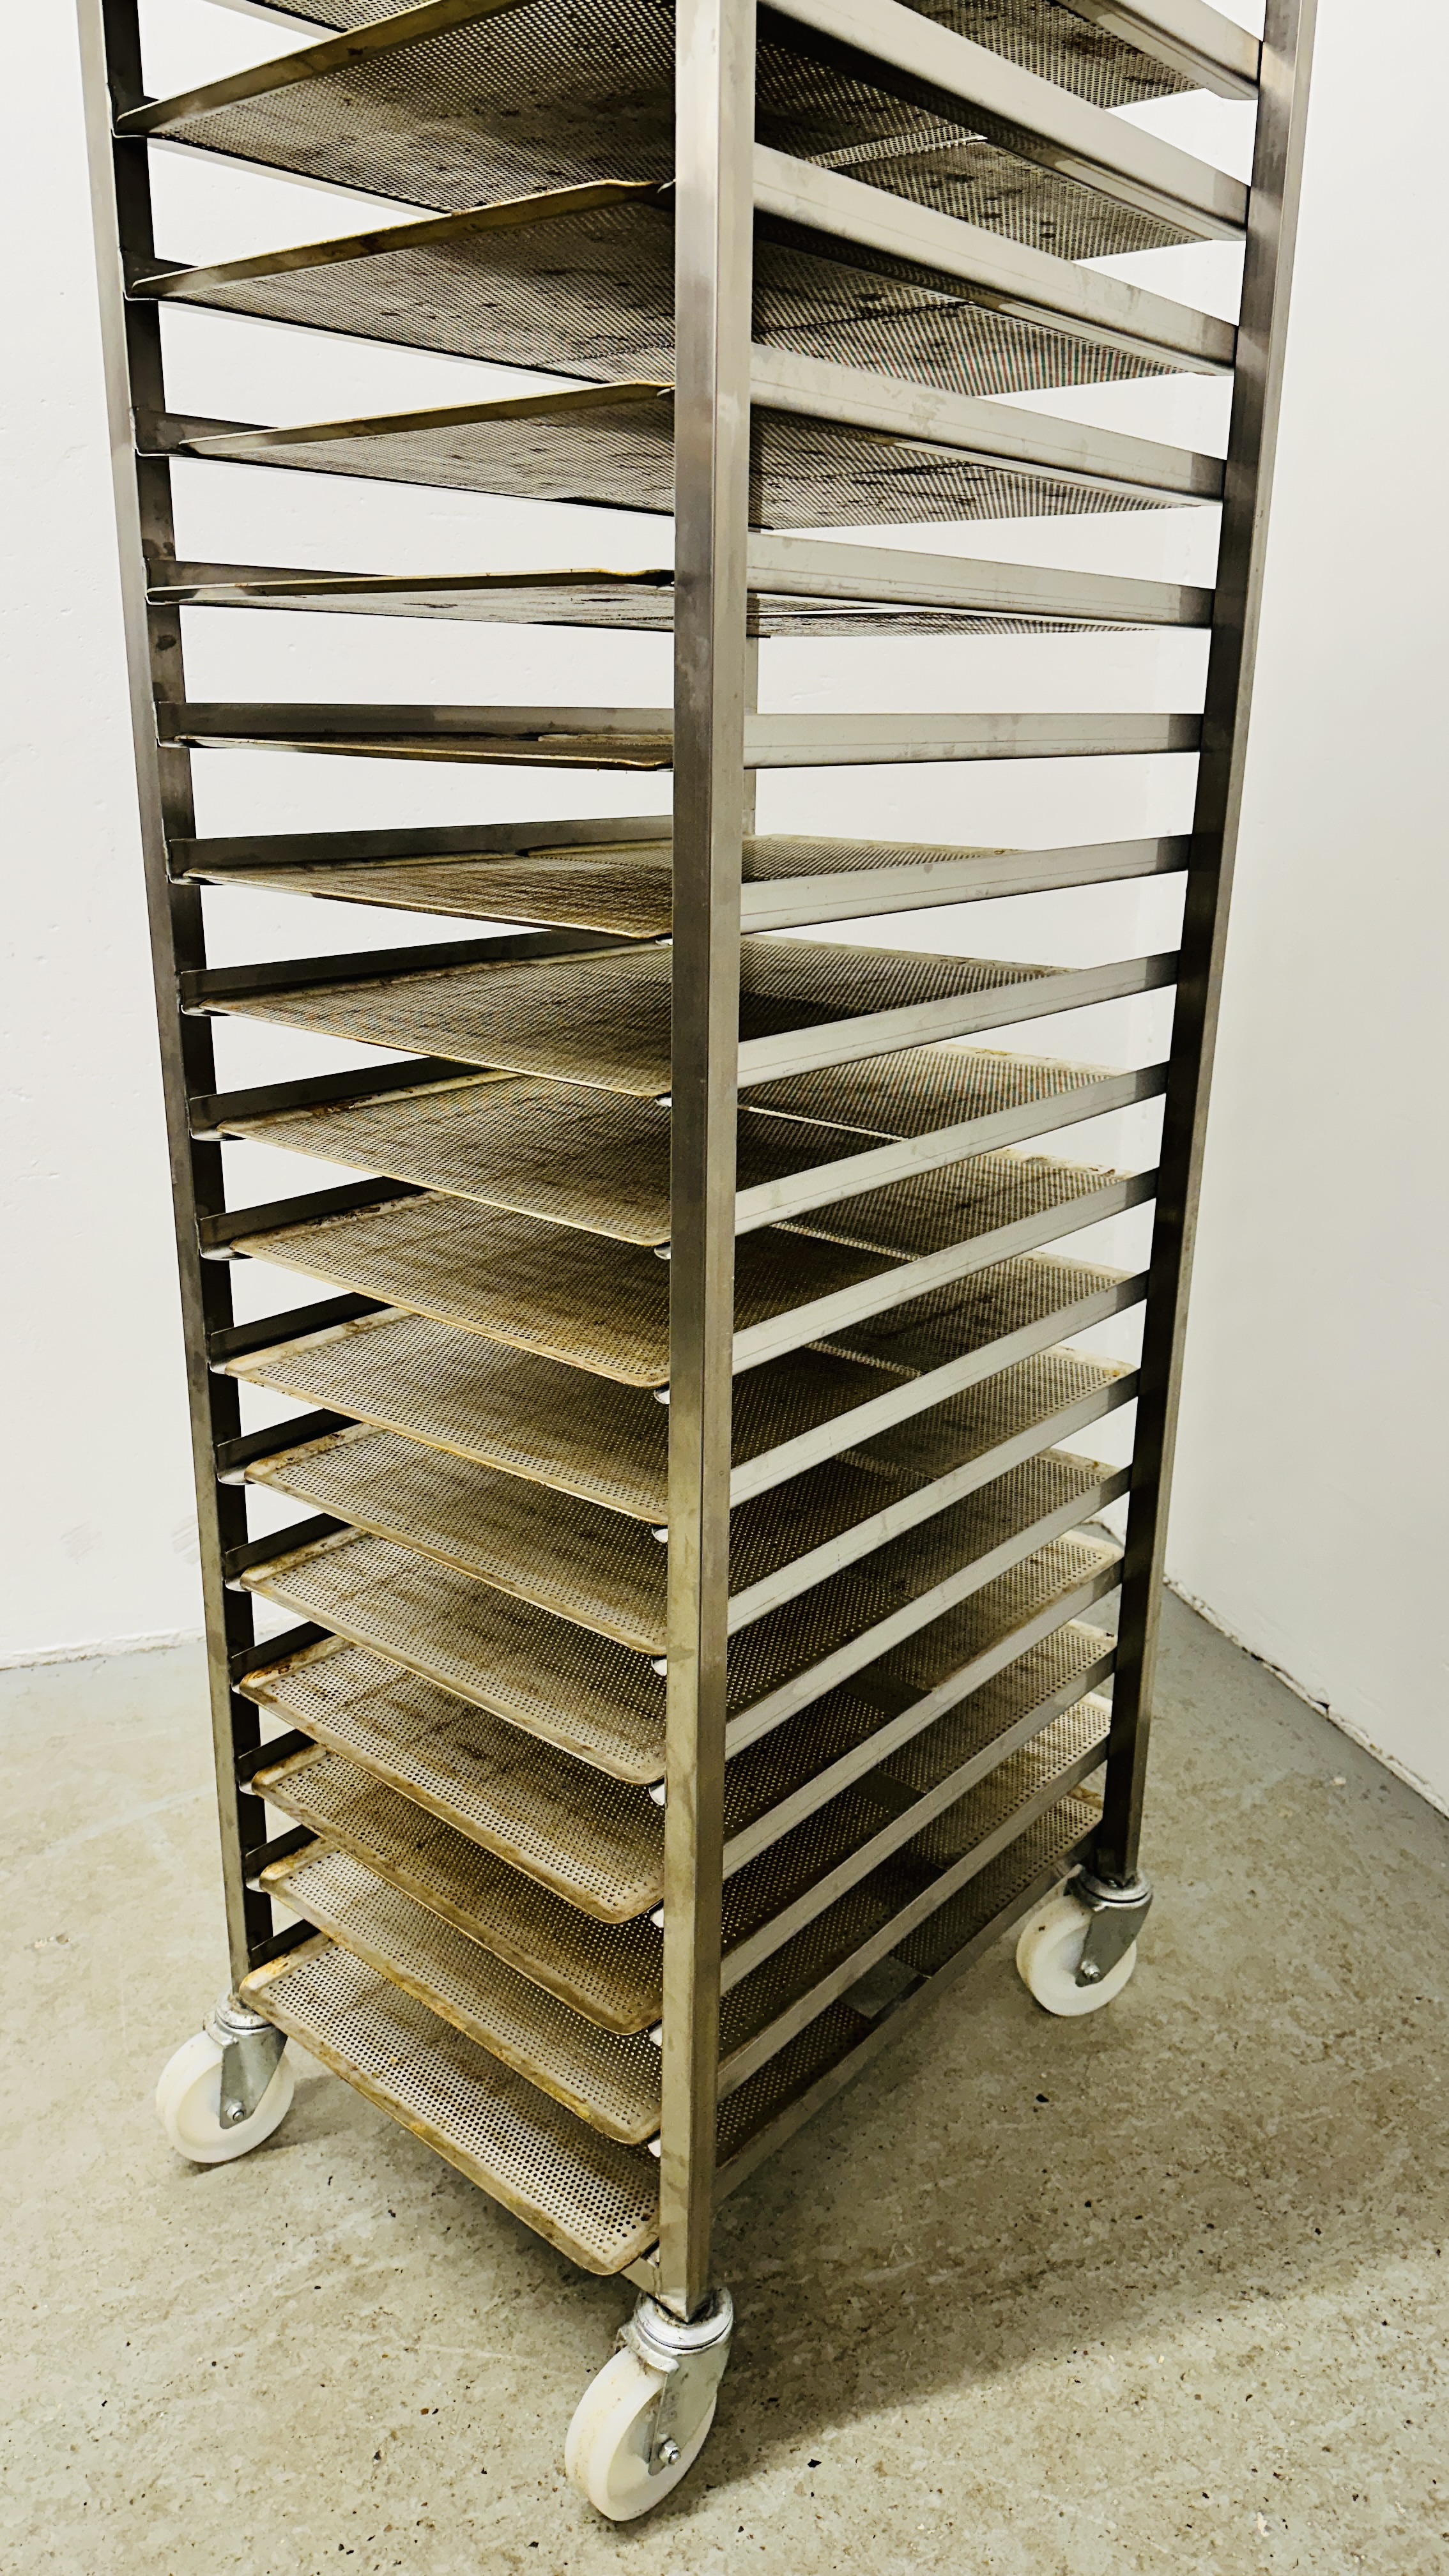 STAINLESS STEEL 20 TIER COMMERCIAL WHEELED BAKING TRAY RACK COMPLETE WITH TRAYS - HEIGHT 182CM. - Image 4 of 7